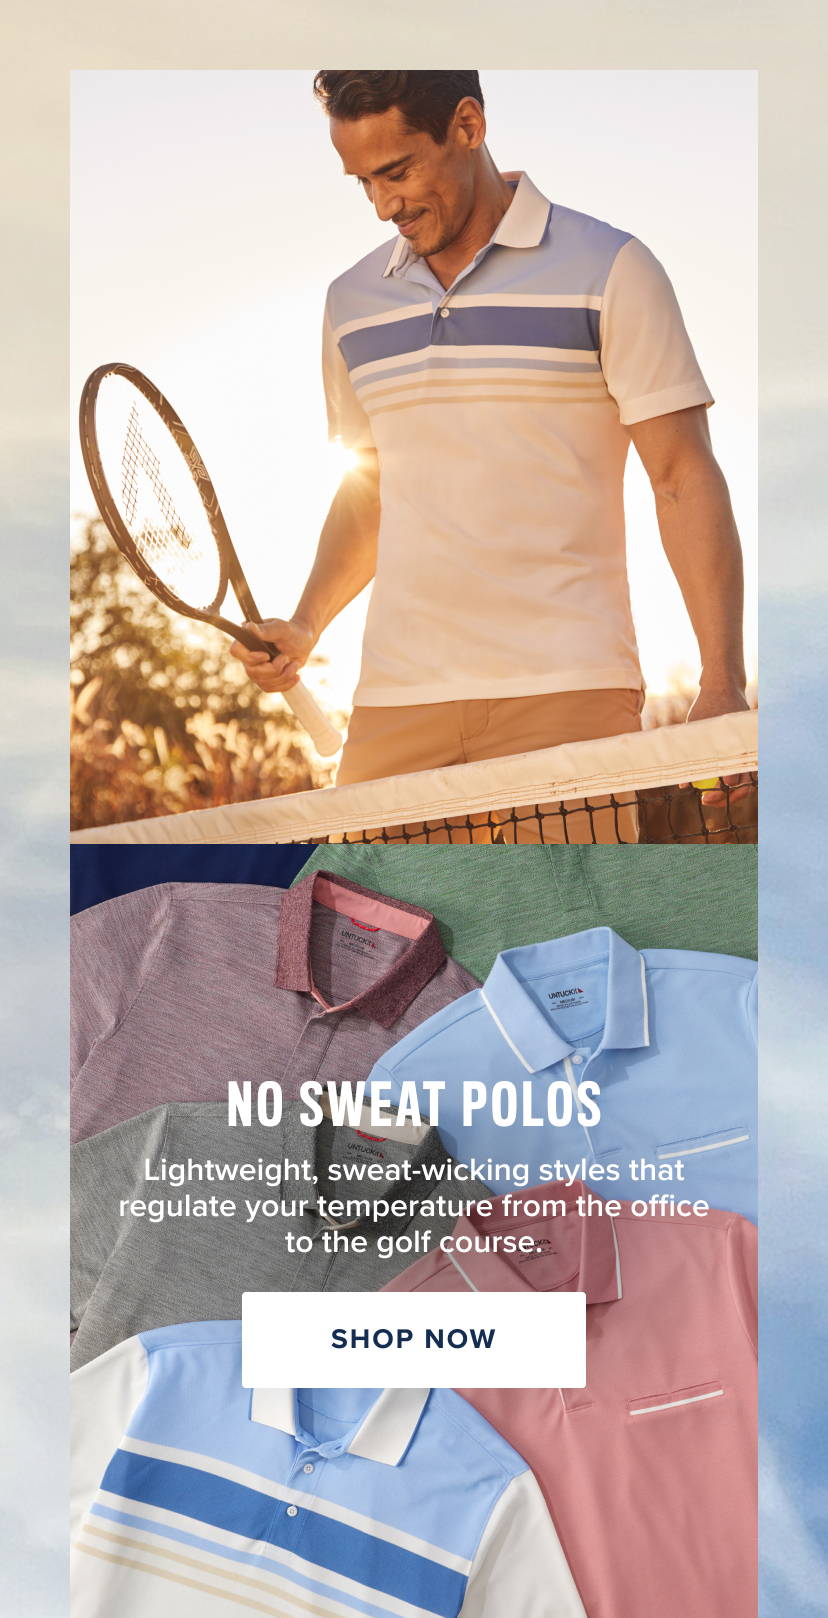 No Sweat Collection — Lightweight, sweat-wicking styles that regulate your temperature from the office to the golf course